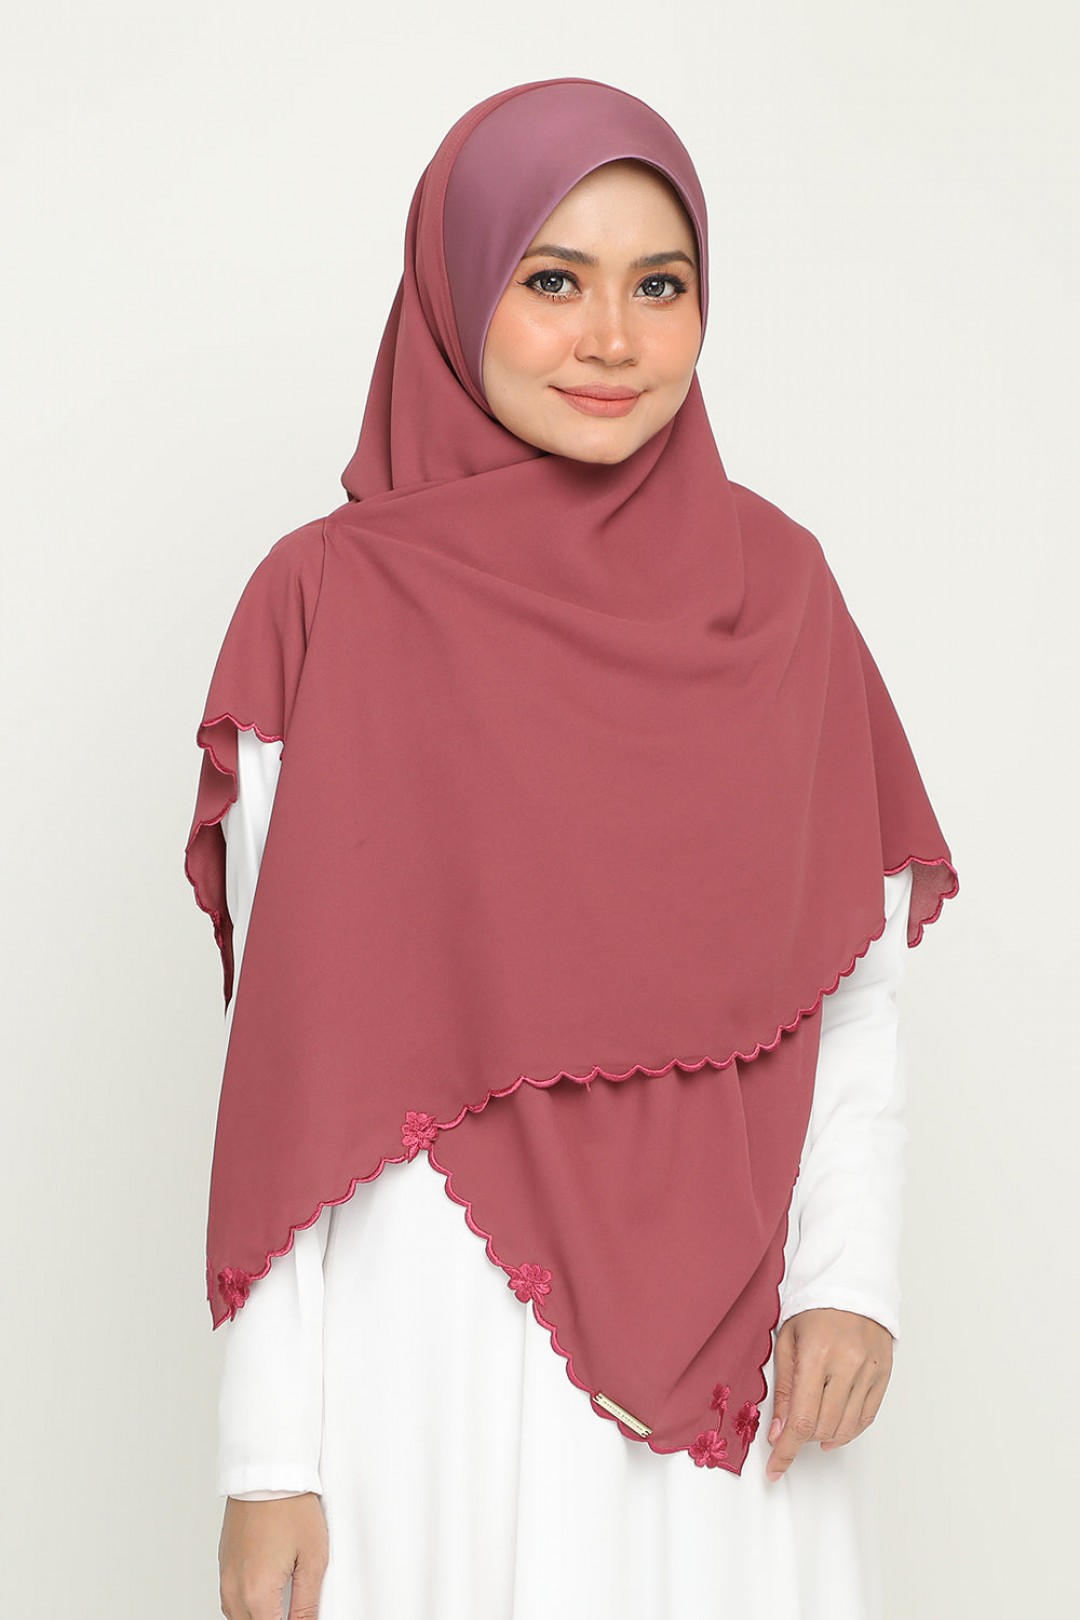 Instant Bawal Sulam Magenta Cherry